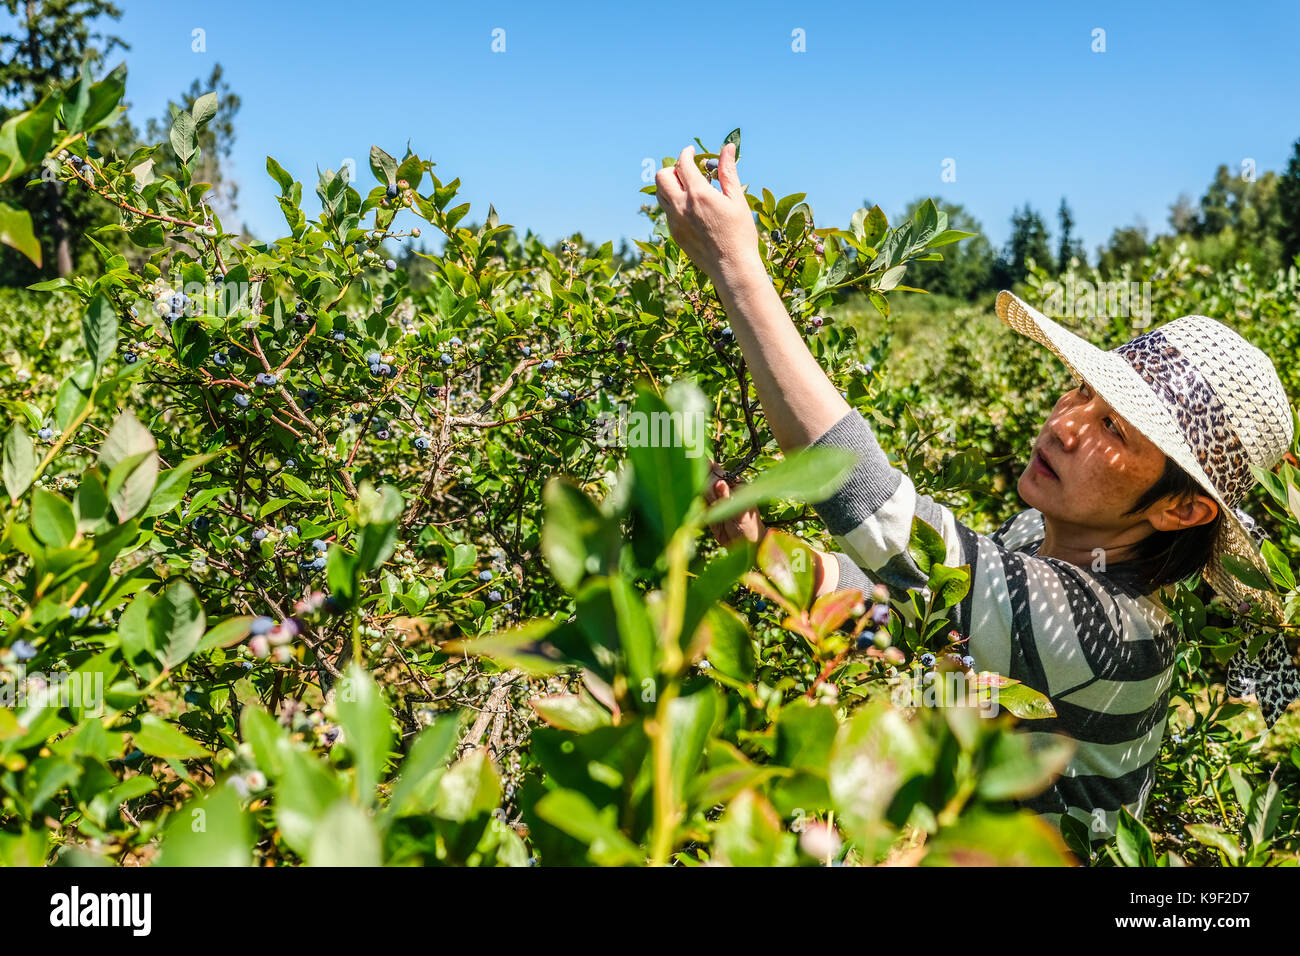 An Asian Female with a straw hat was picking blue berries at a U PICK blue berry farm in the summer Stock Photo